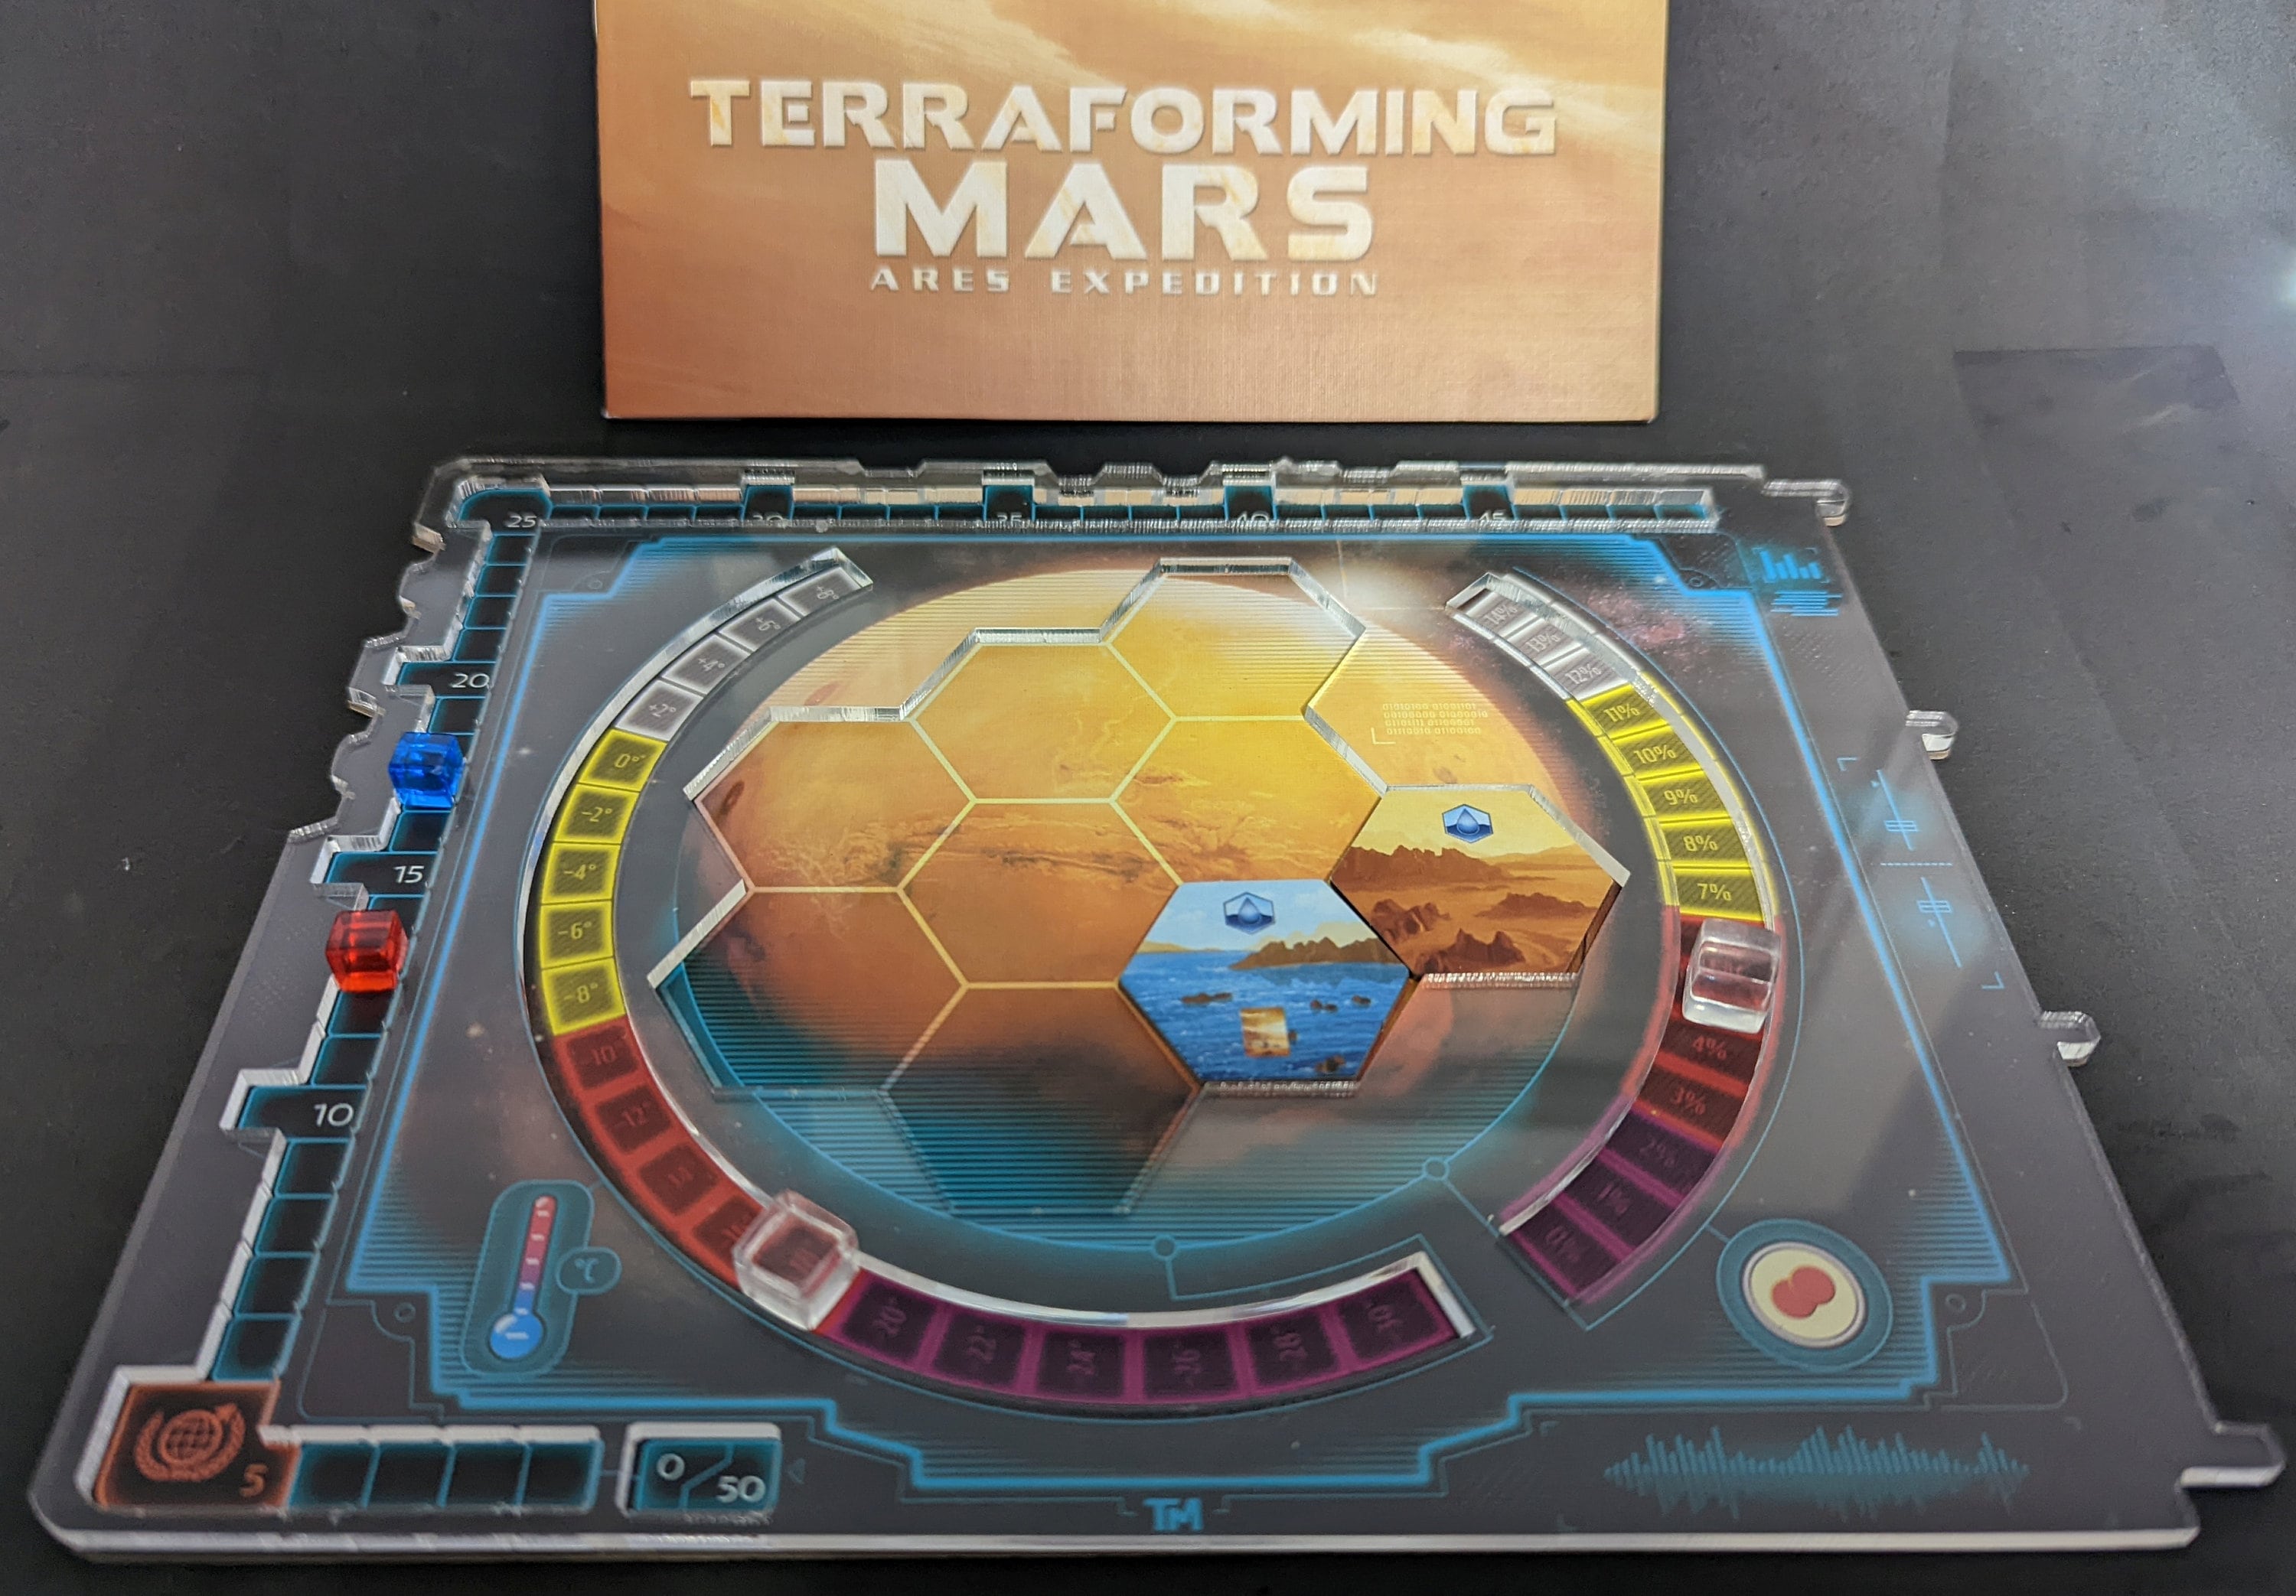 Terraforming Mars: Ares Expedition Overlay for Game Board 